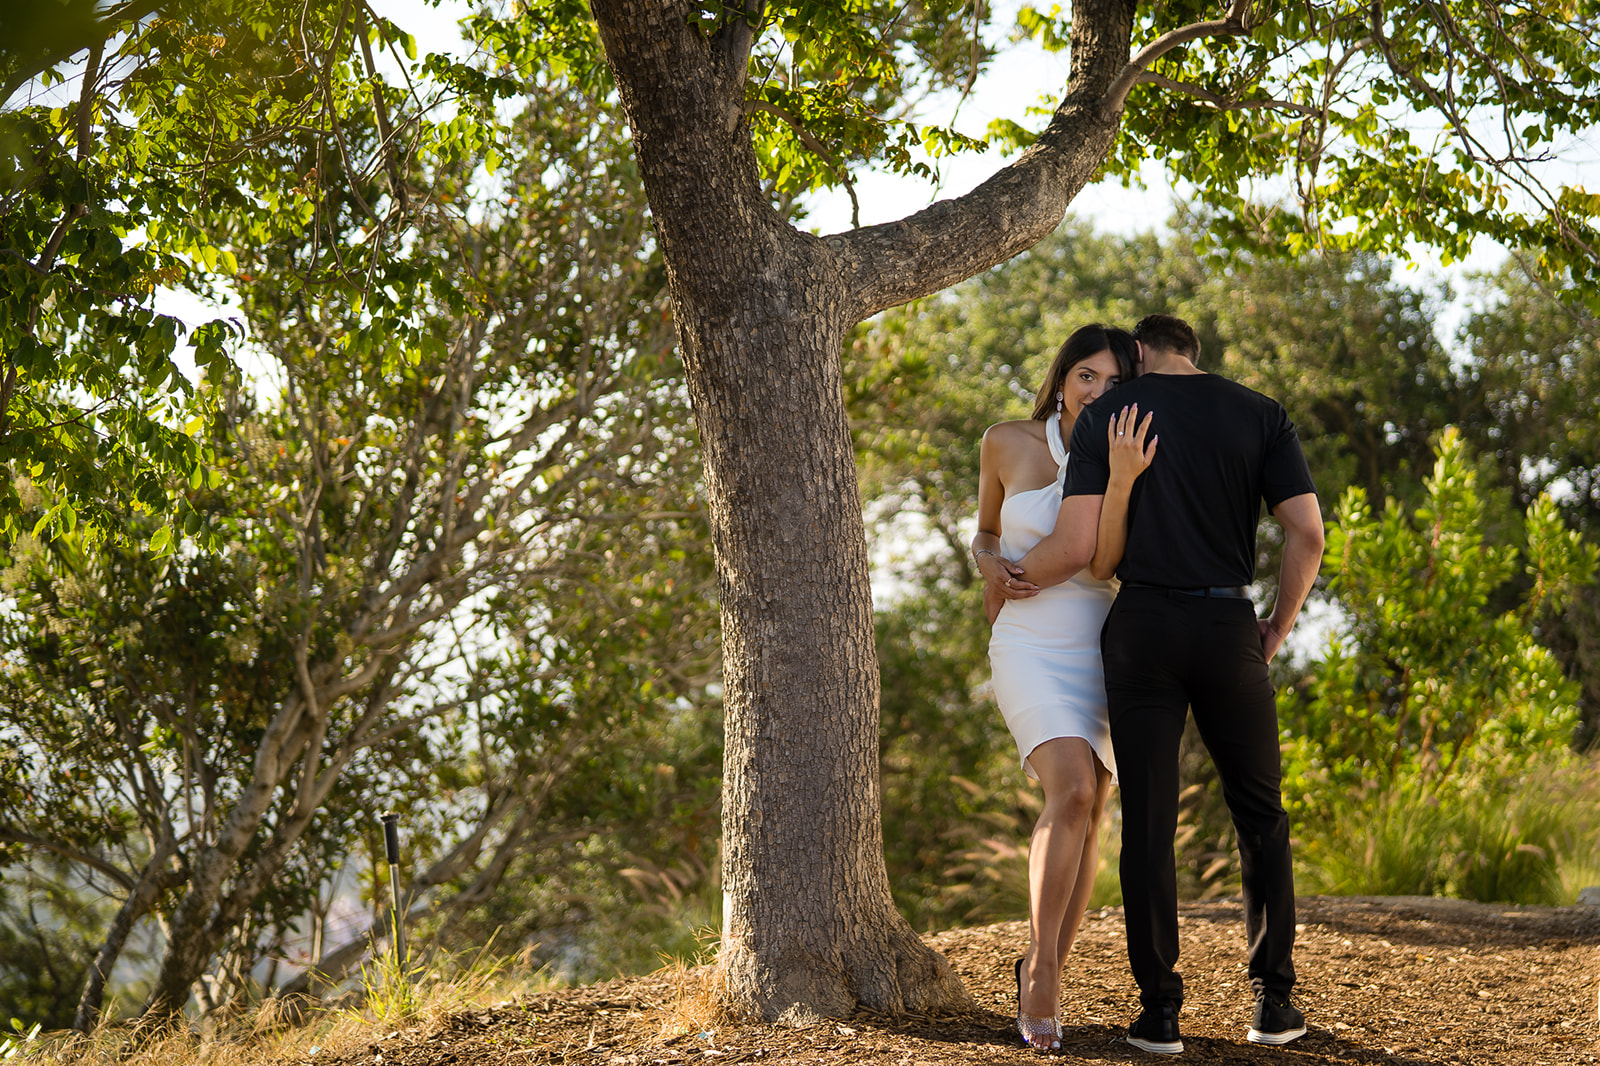 ThomasKim_photography A man and woman having a V & J Engagement Session under a tree, embracing in a hug.